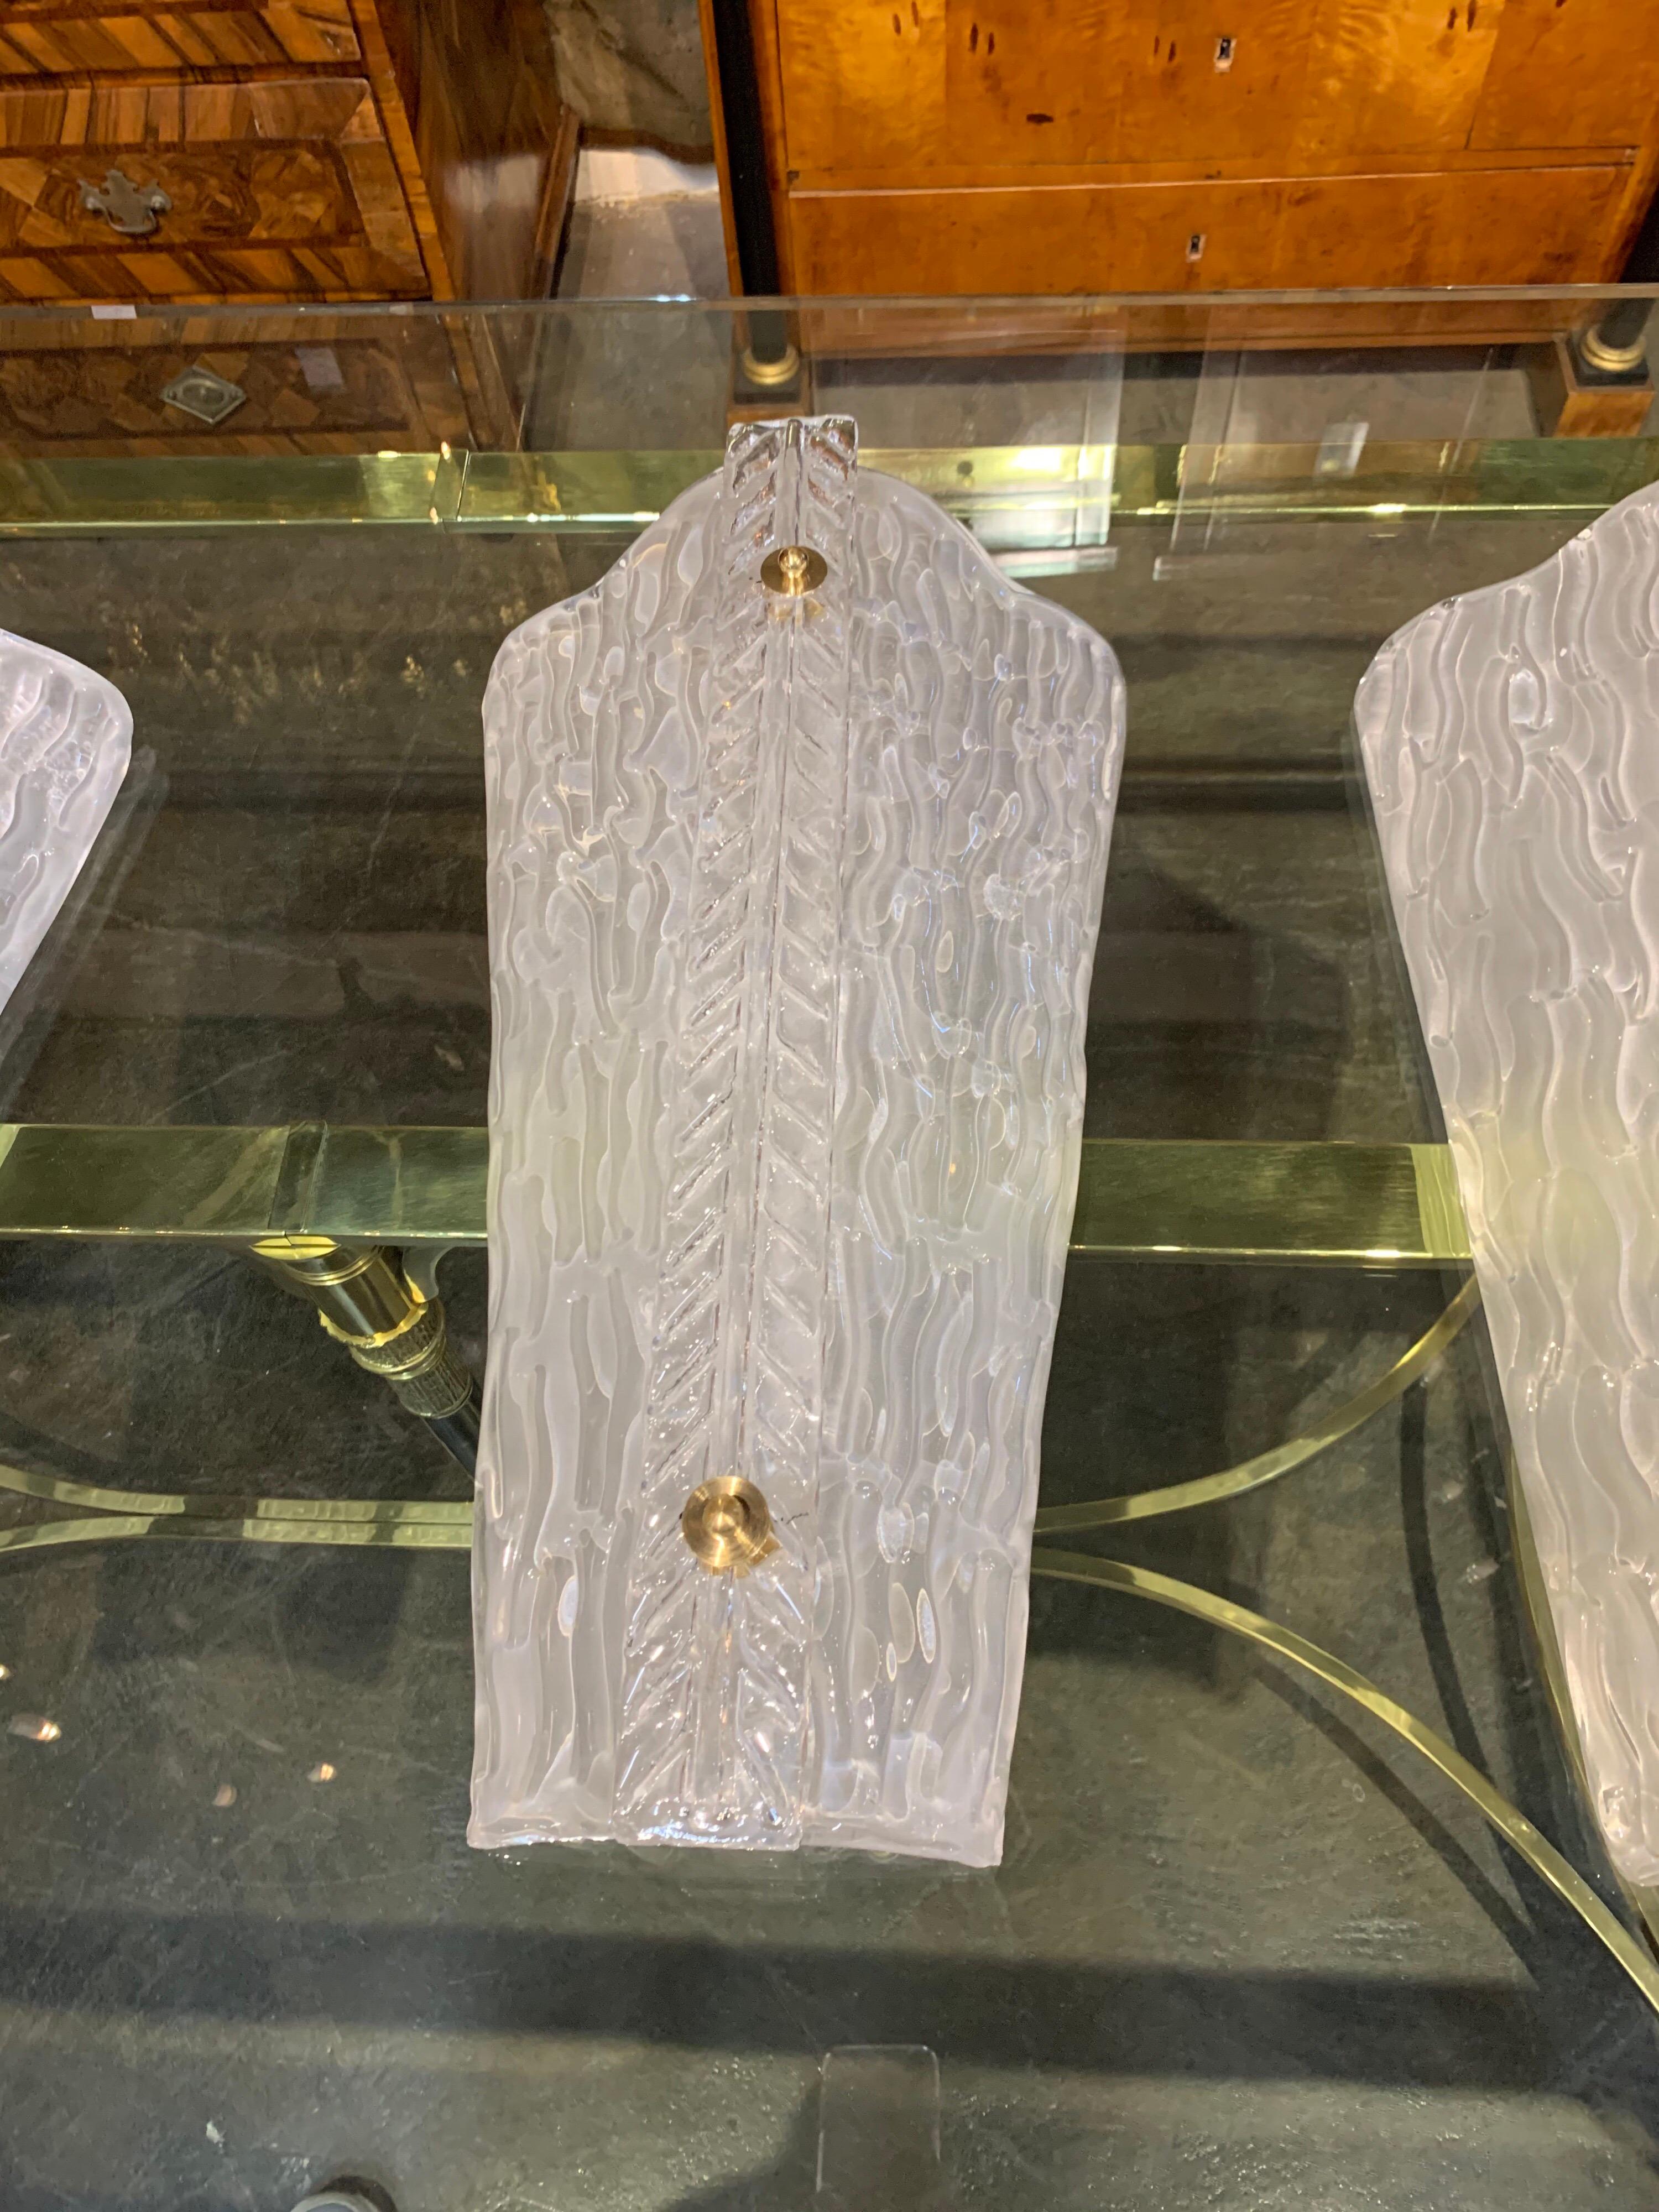 Very elegant set of 4 large scale Murano glass sconces. Each sconce has 3-light. These would work well in a variety of setting. Note: Would sell 2 for $3600.